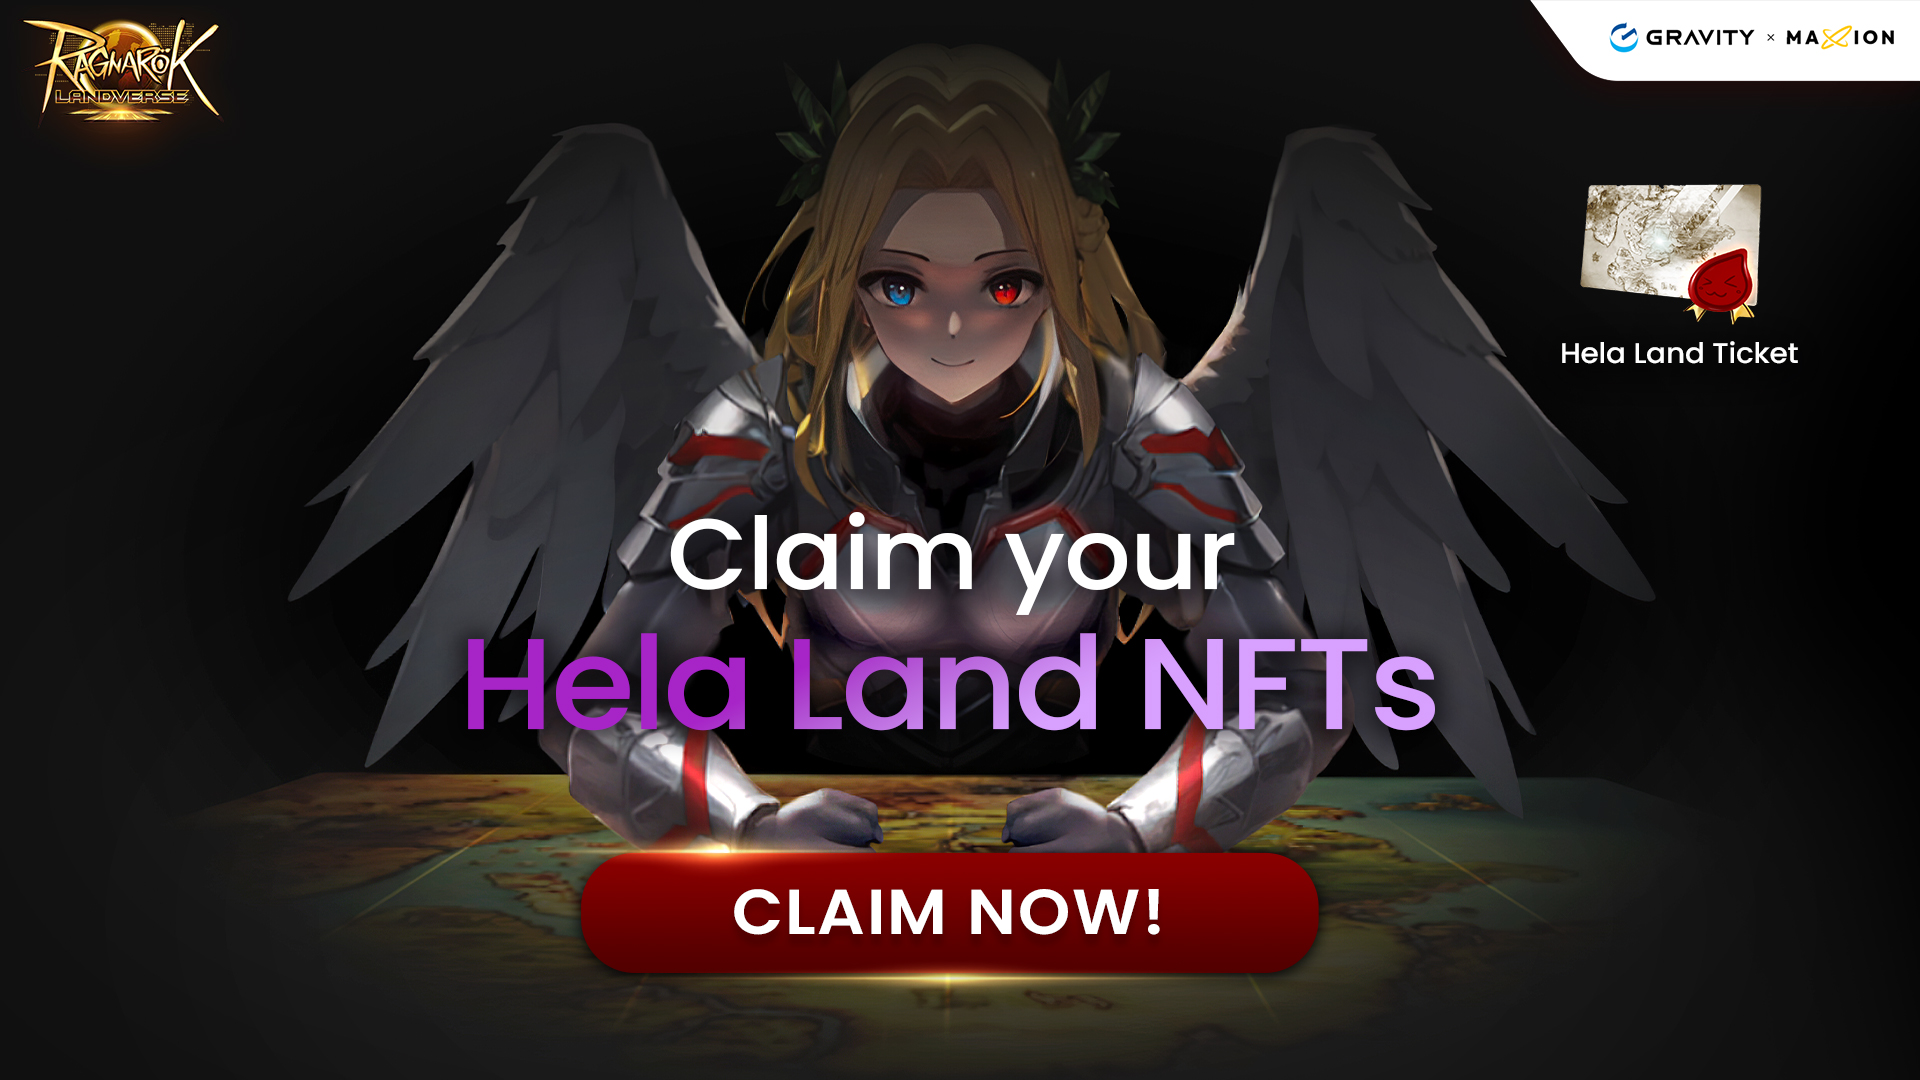 Redeem your Hela Land Tickets now!